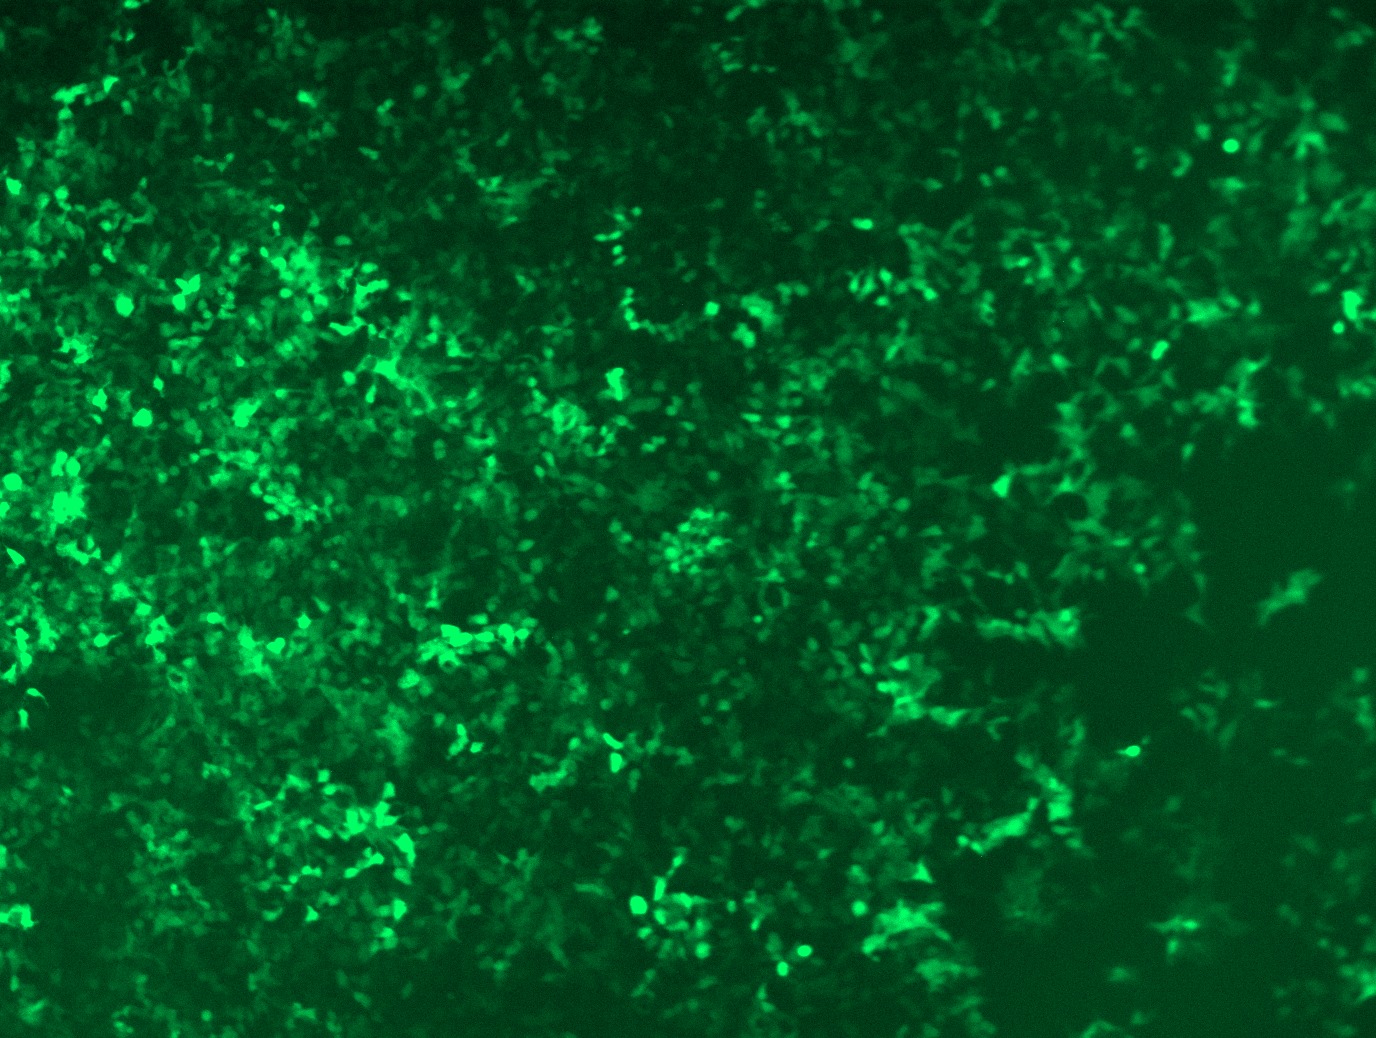 GFP signal was observed under microscope at 48 hours after transduction of TL308569A virus into HEK293 cells. TL308569A virus was prepared using lenti-shRNA TL308569A and TR30037 packaging kit.